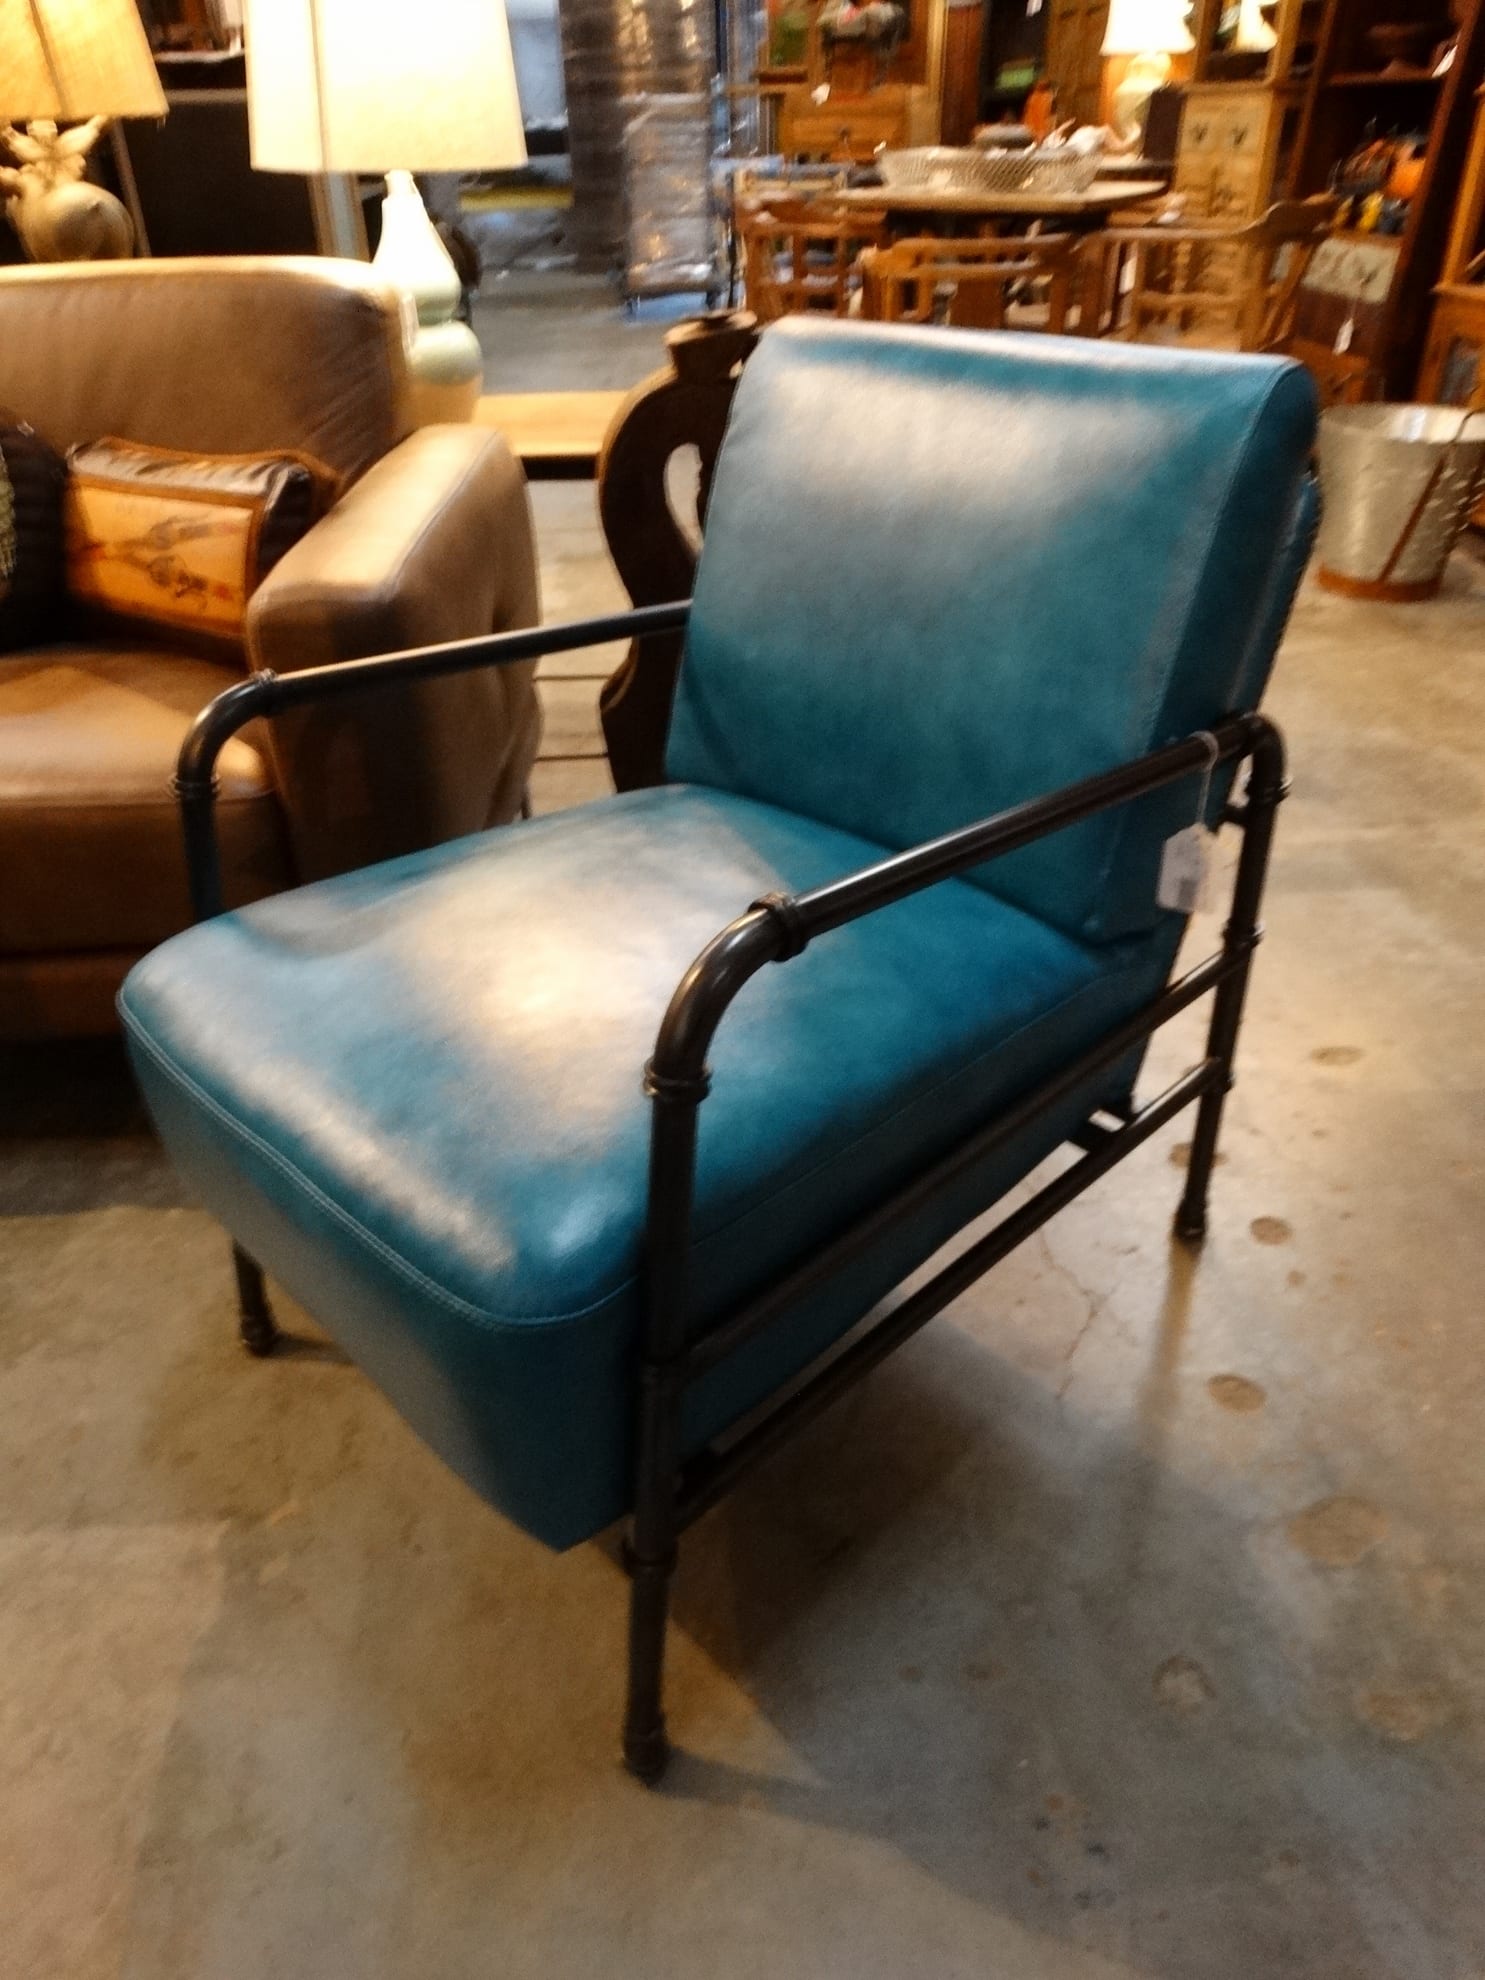 Elegant Blue Leather Chair Is Compact, Light Blue Leather Arm Chair